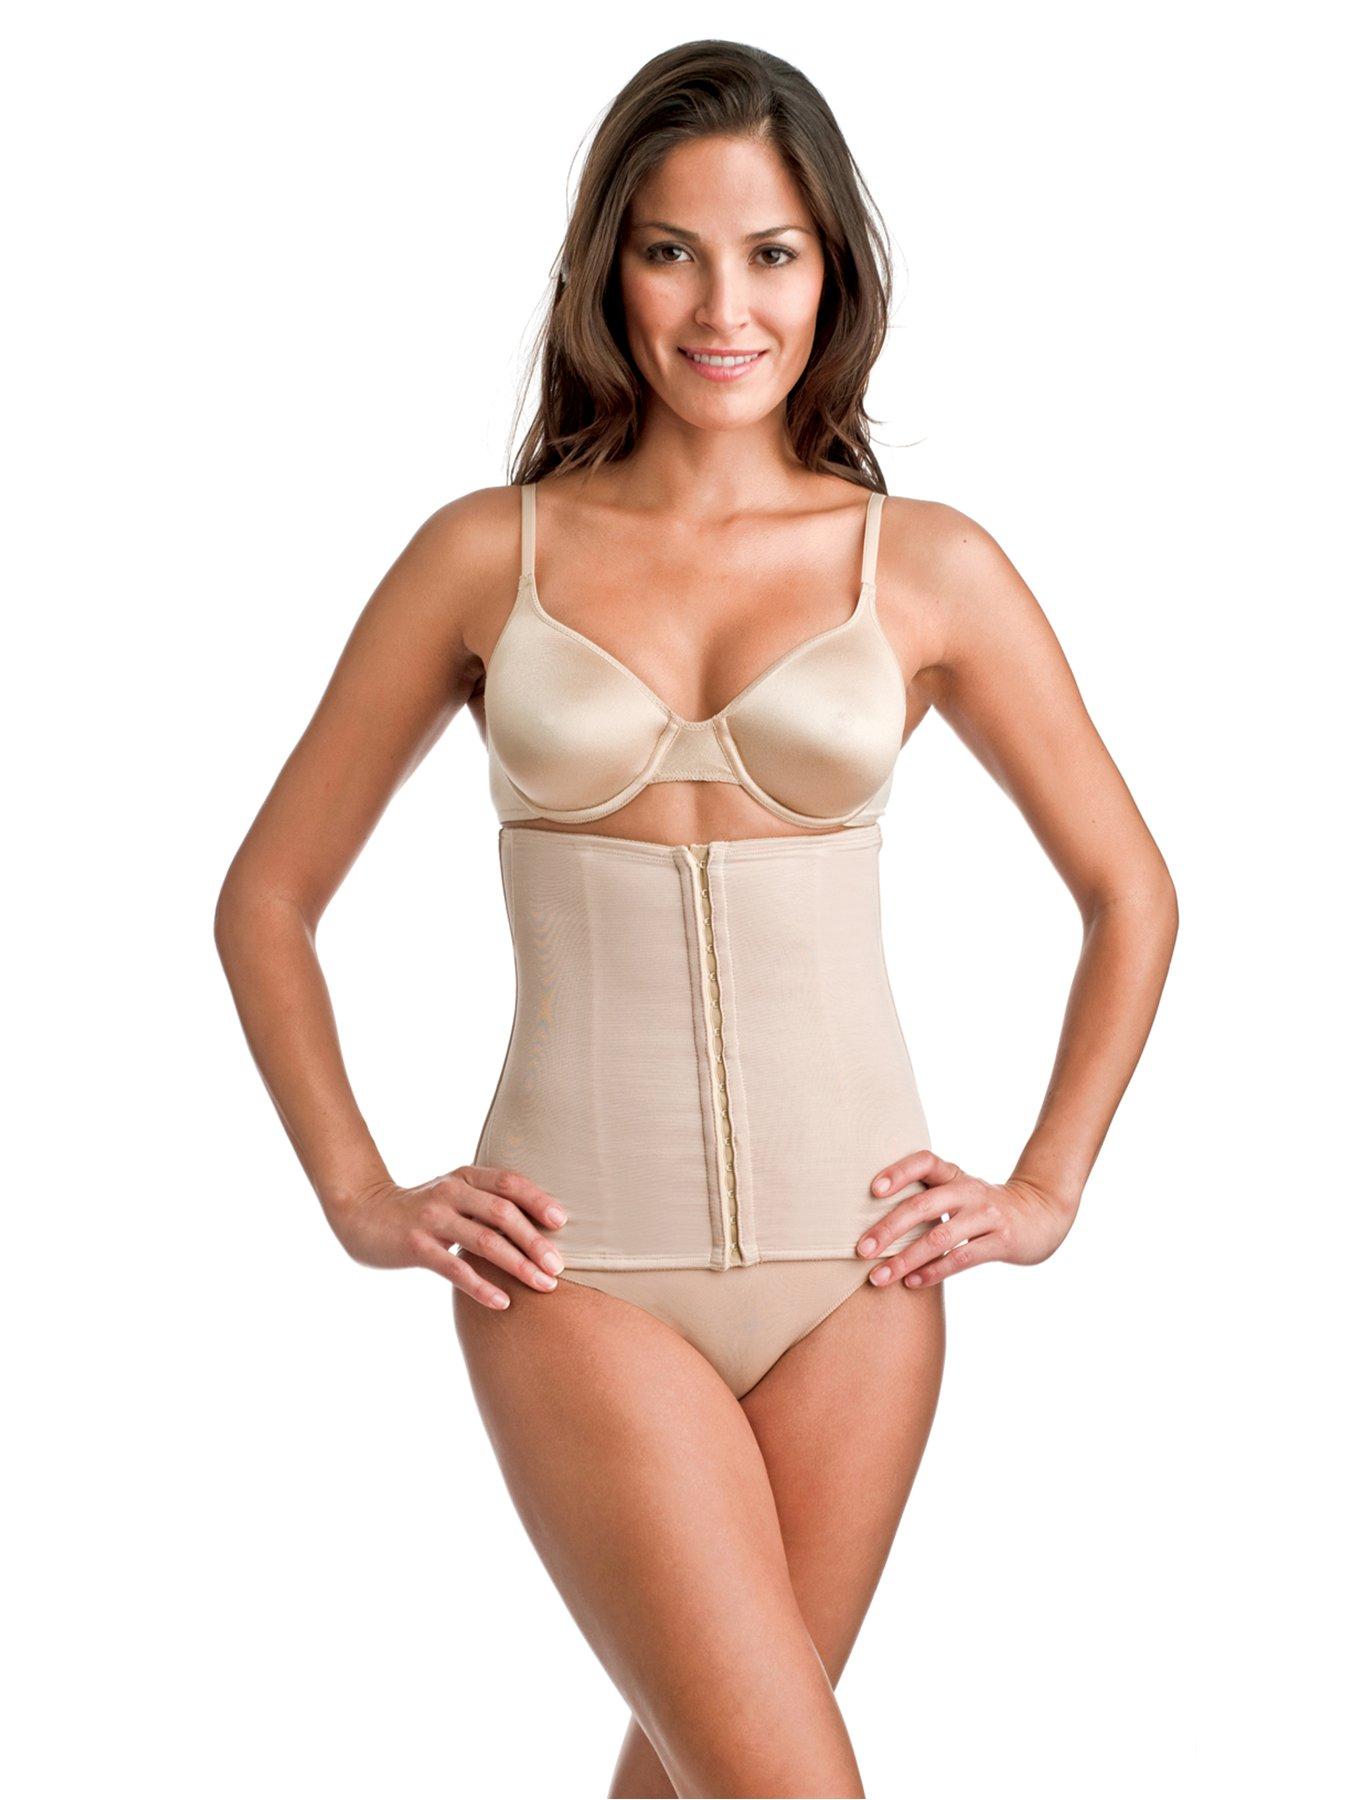 Body Shapers, Miraclesuit